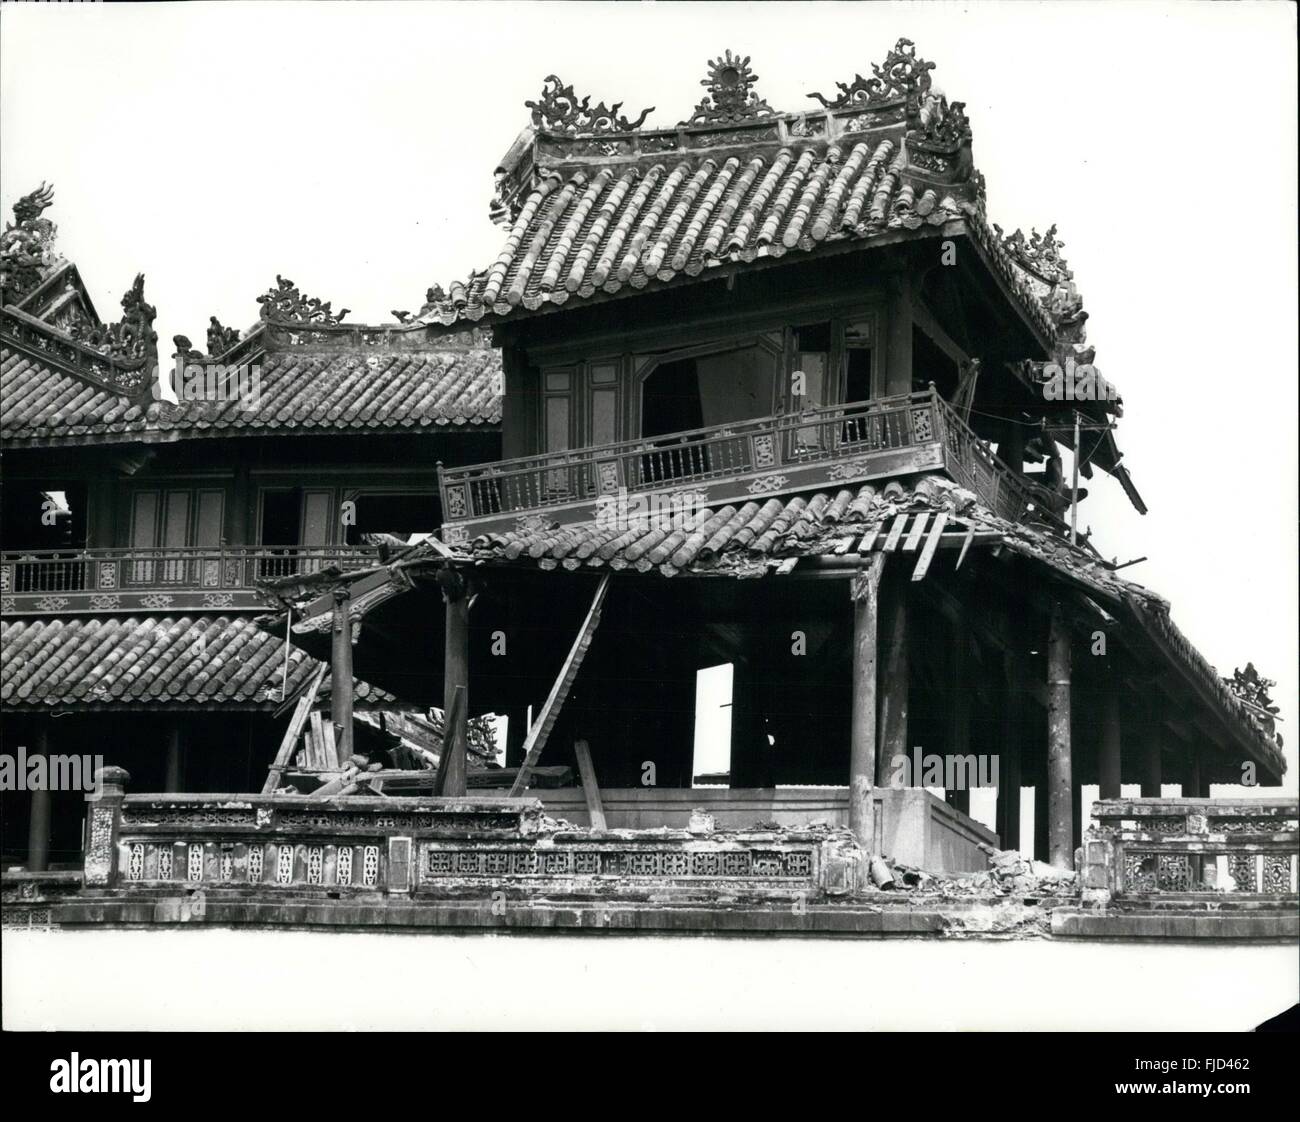 1962 - Hue - The Imperial City: In more glorious days, the once stately city of Hue was the Imperial Capital of Vietnam. The Citadel and Palace were bombed by American B 52 bombers when occupied by Vietkong forces. Now the wrecked Palace has become a fitting memorial to what is now the world's most violent country. © Keystone Pictures USA/ZUMAPRESS.com/Alamy Live News Stock Photo